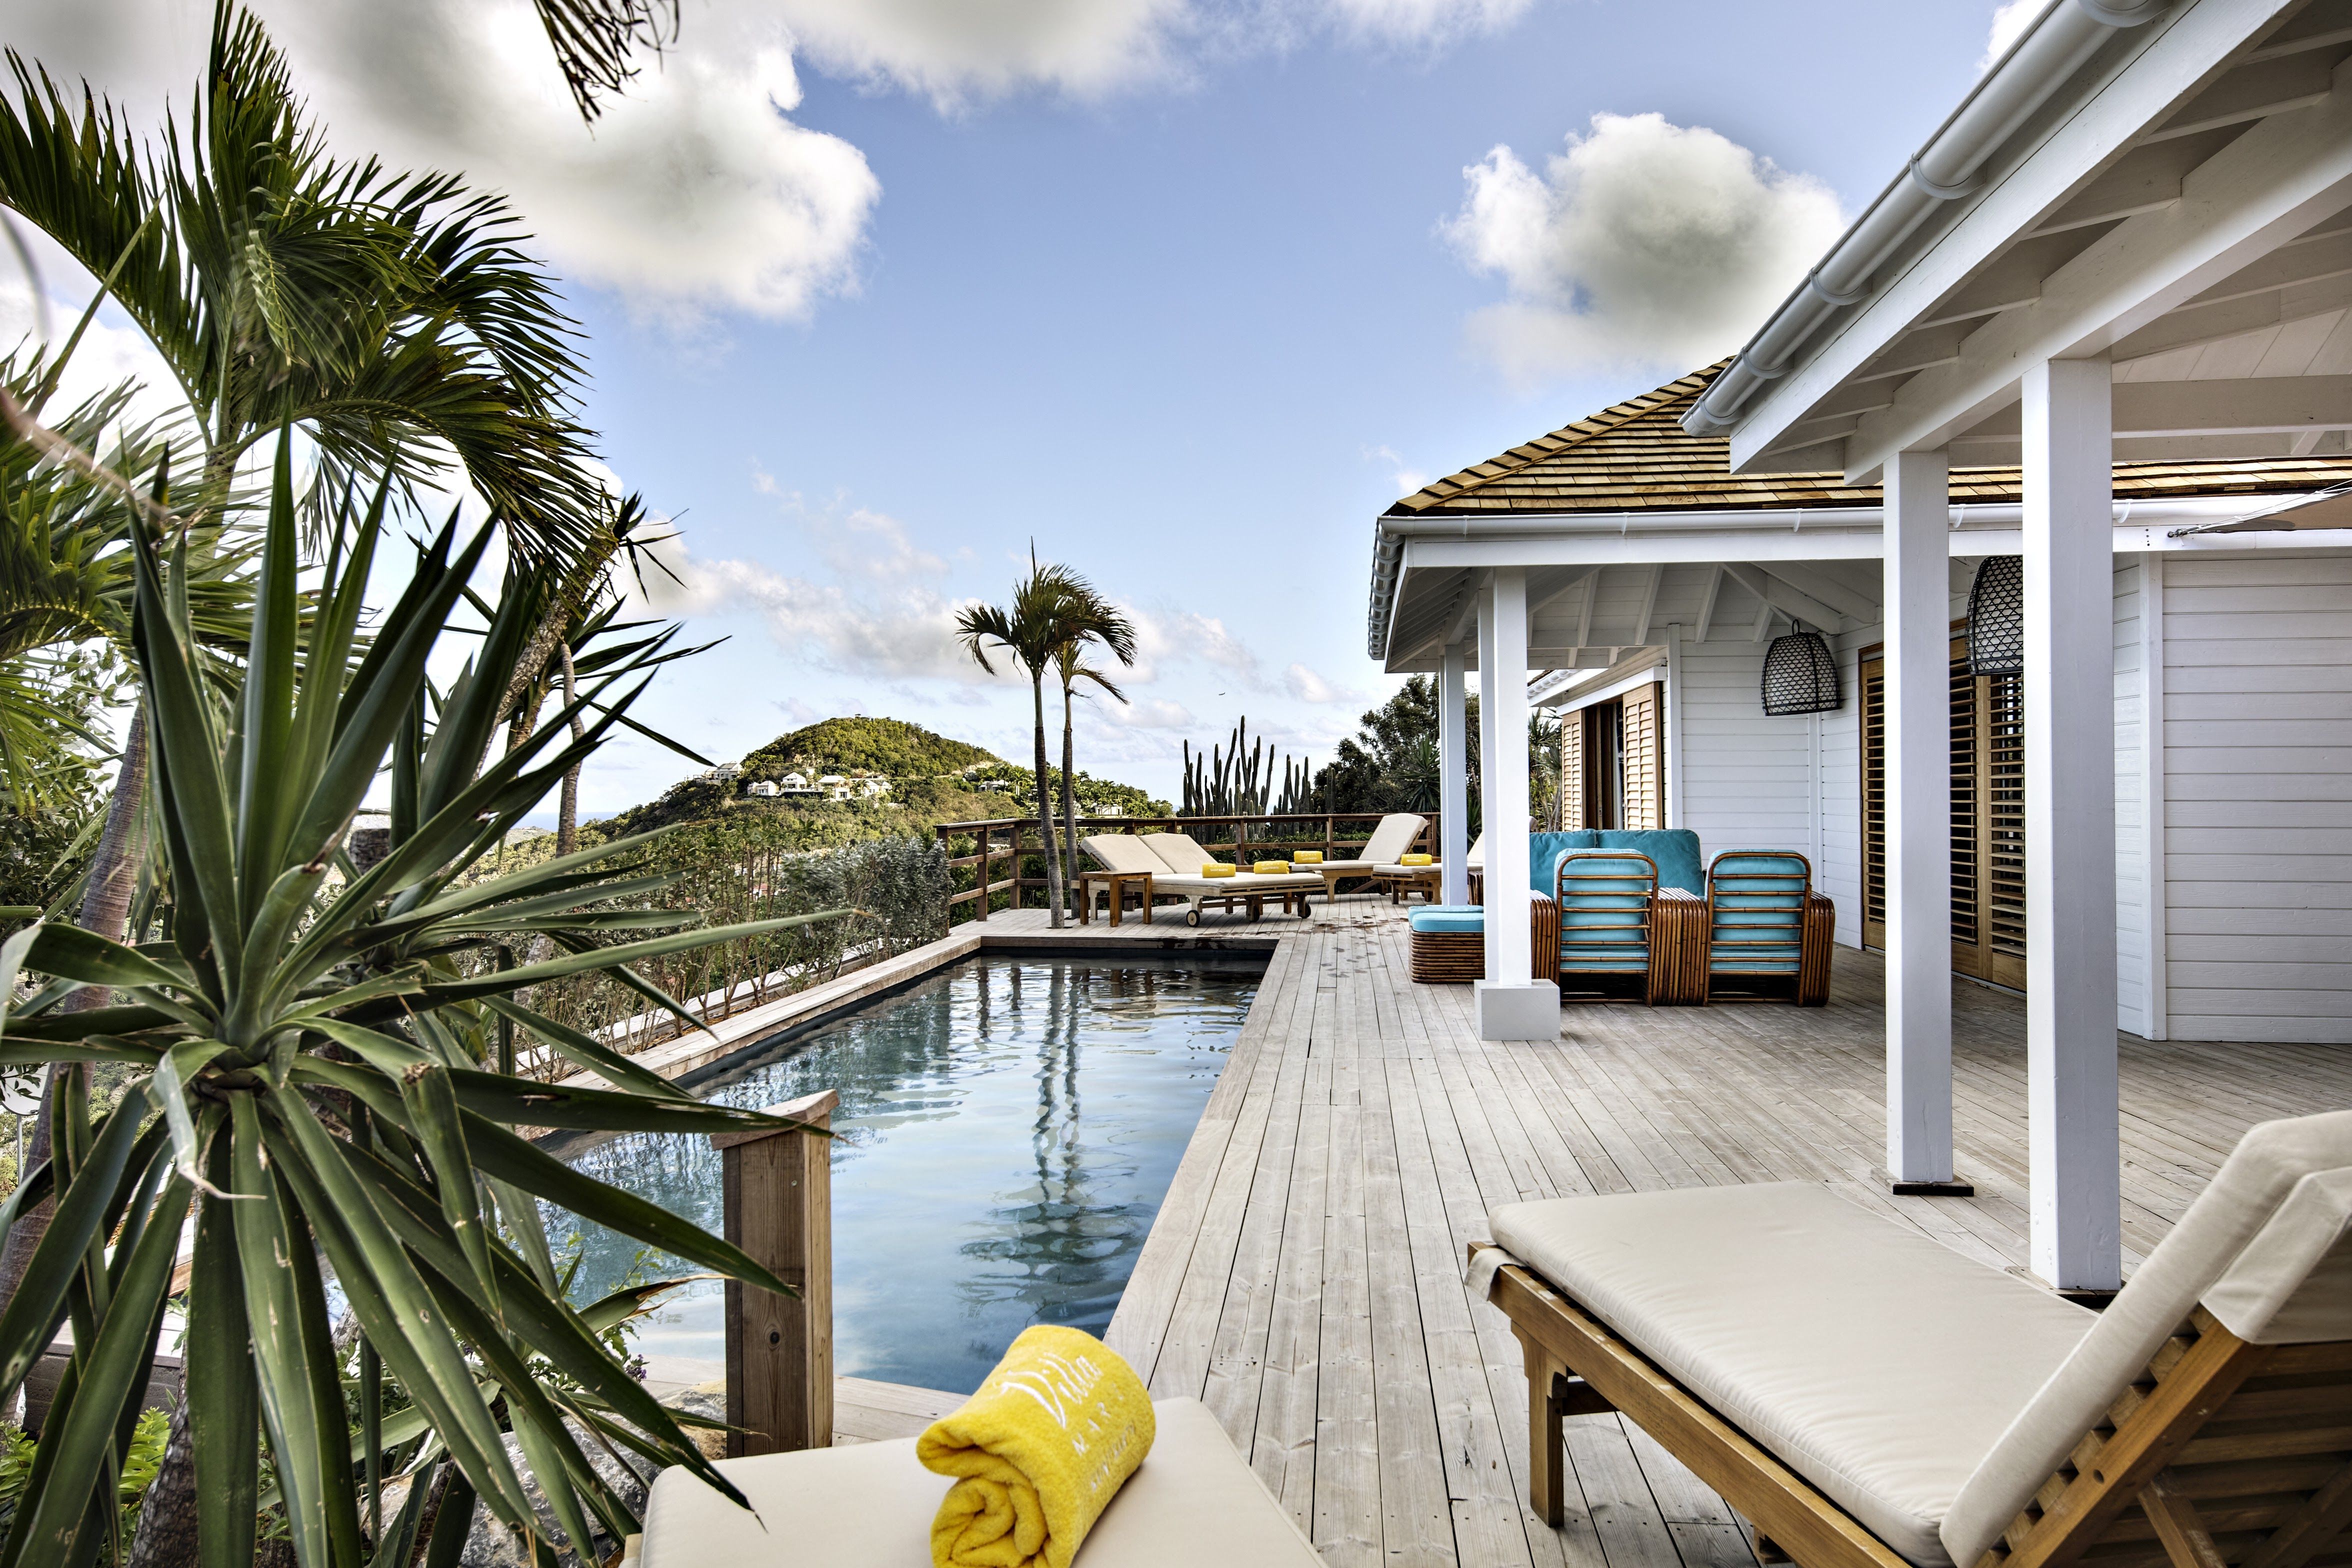 St. Barth's Luxury Hotels, Villas Reopen to International Guests